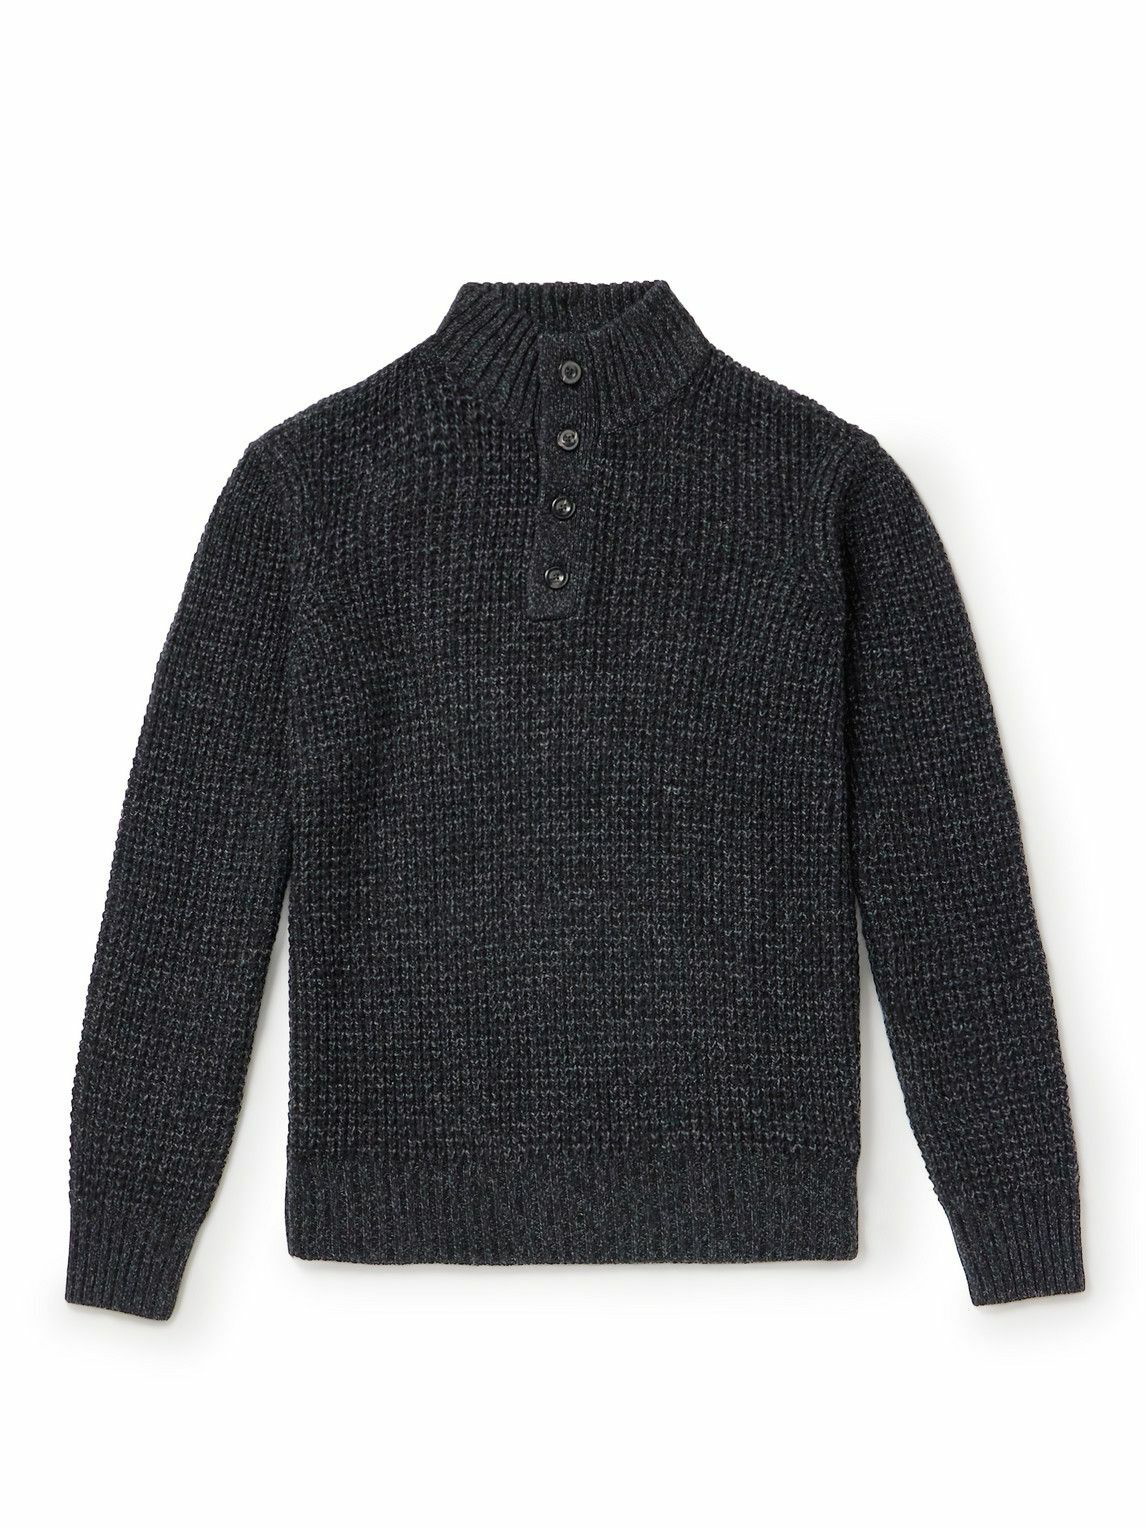 Faherty - Waffle-Knit Wool and Cashmere-Blend Sweater - Black Faherty